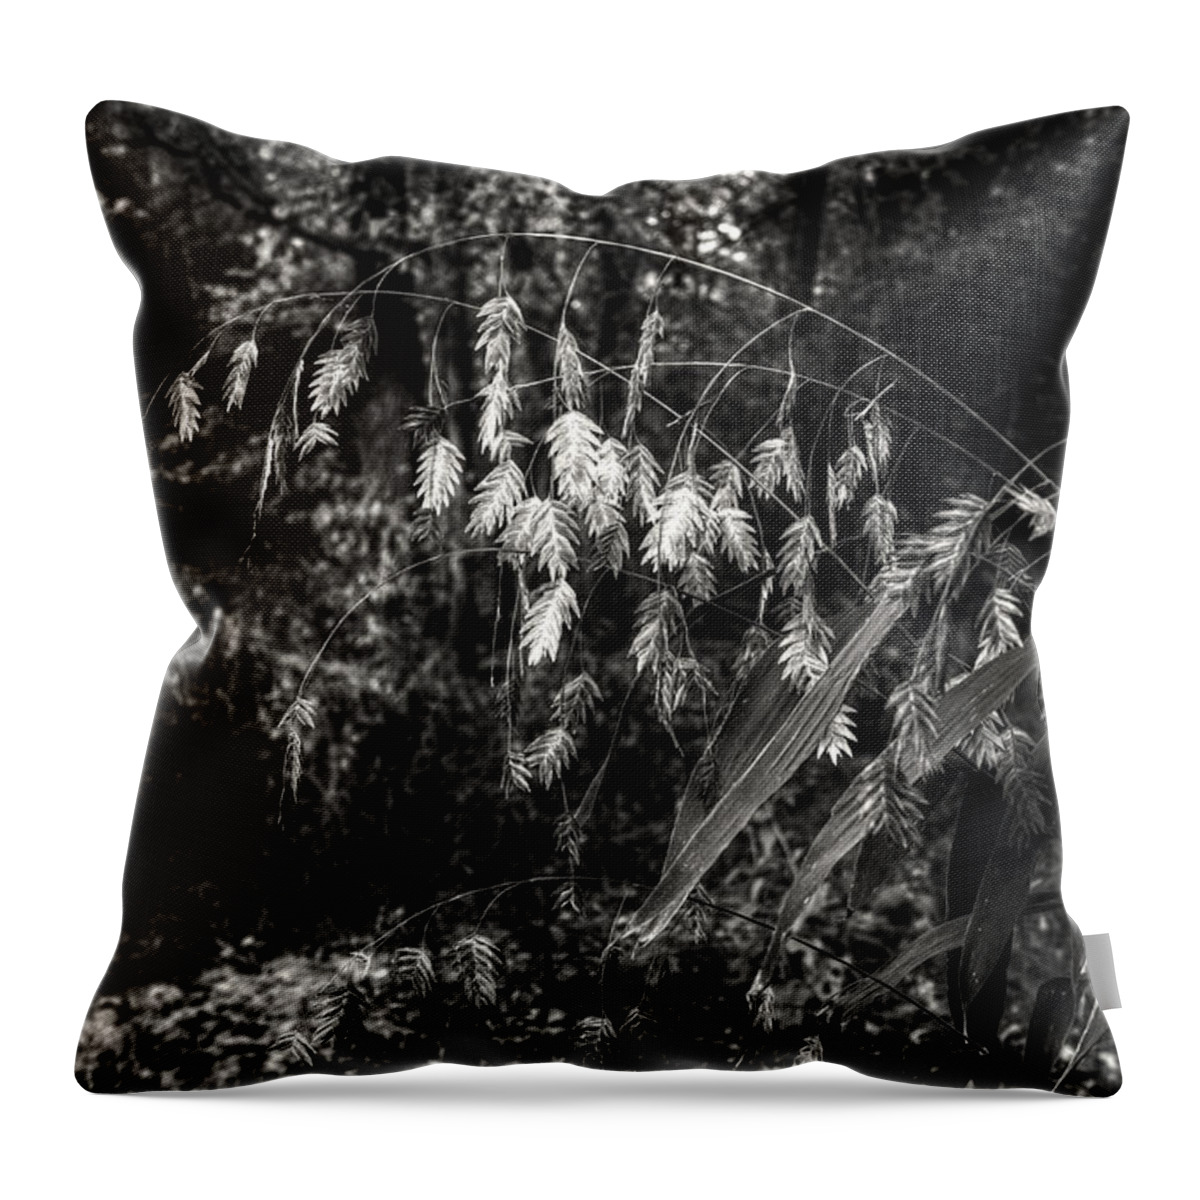 Wild Oats Sown Throw Pillow featuring the digital art Wild Oats Sown by William Fields